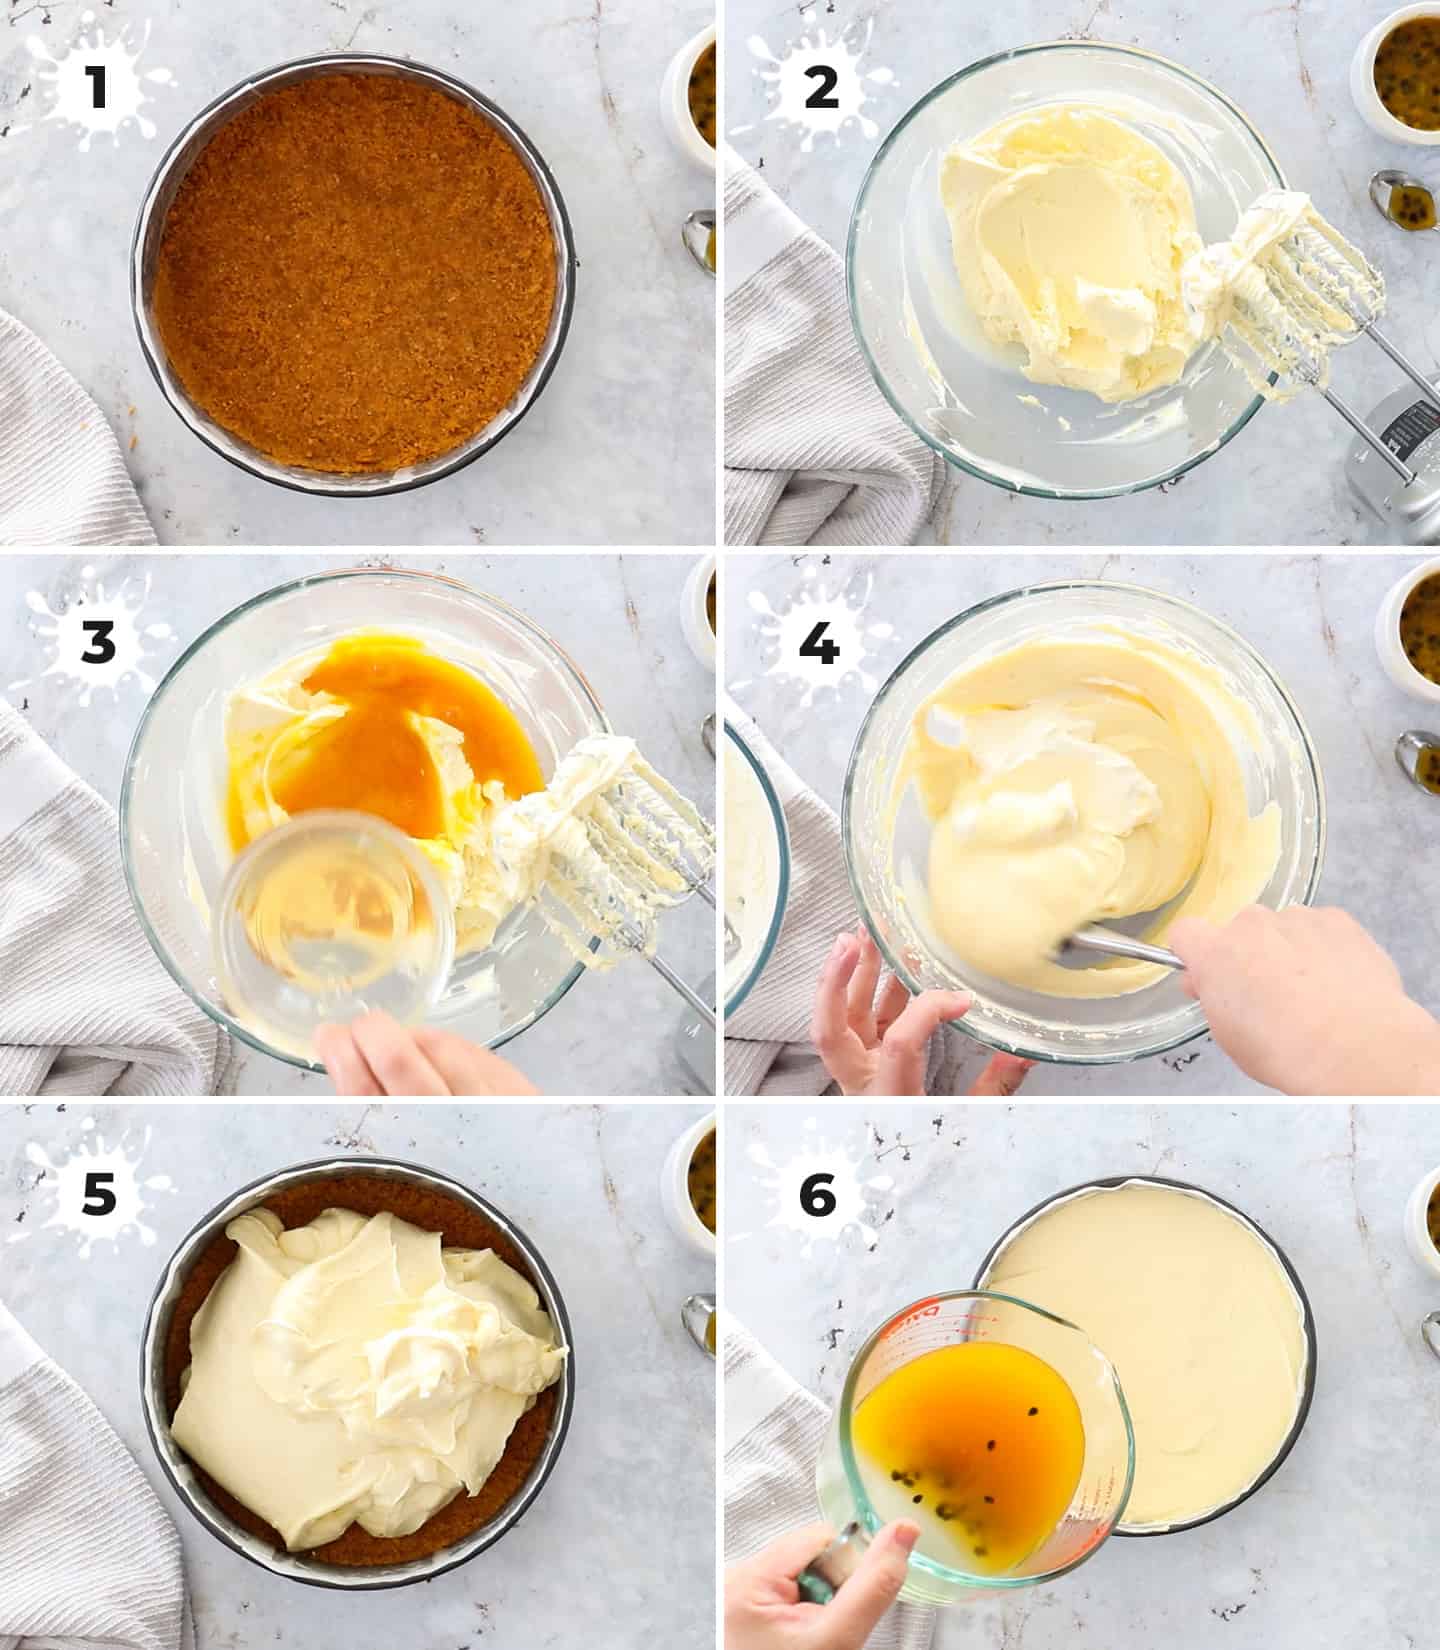 A collage of 6 images showing how to make passionfruit cheesecake.